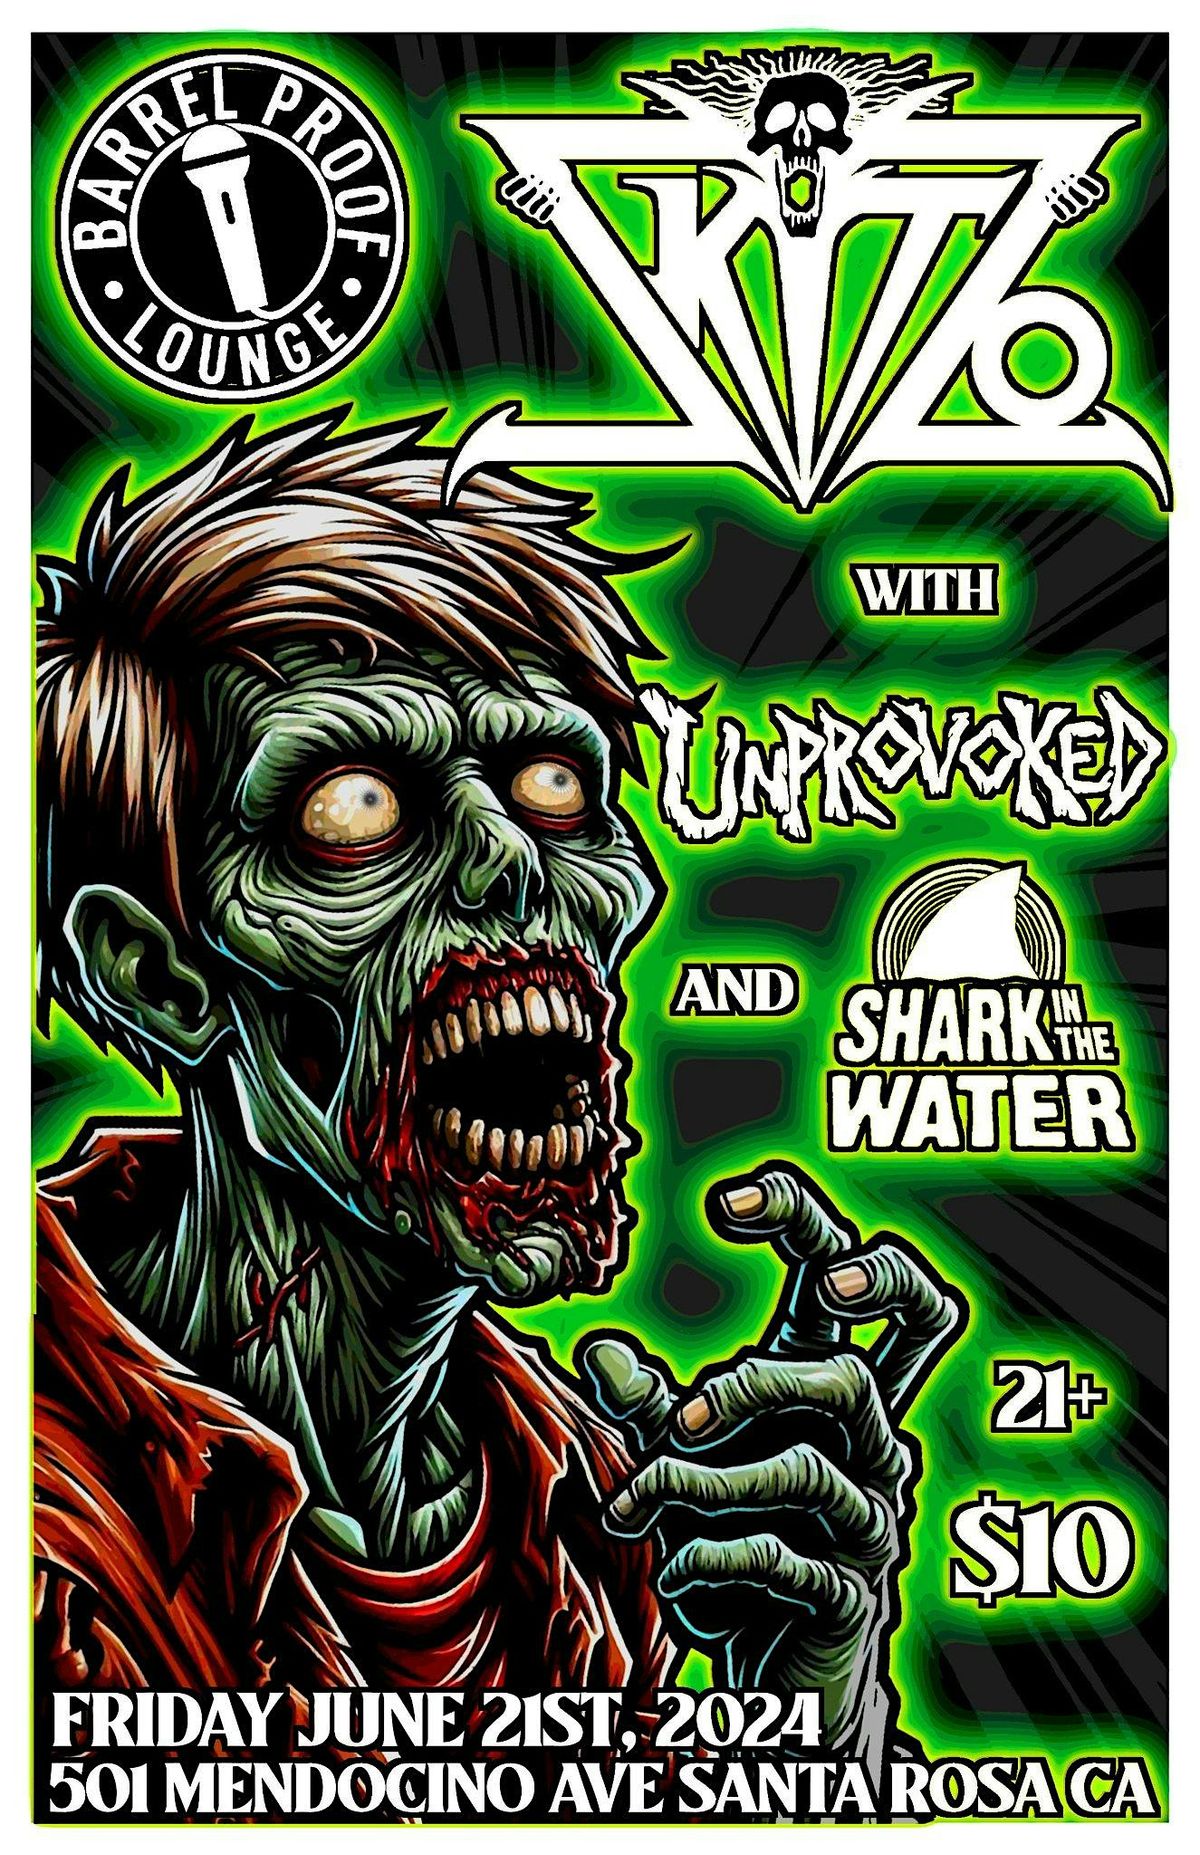 Live  Metal - Skitzo with Unprovoked & Shark in the Water  - Downtown Santa Rosa